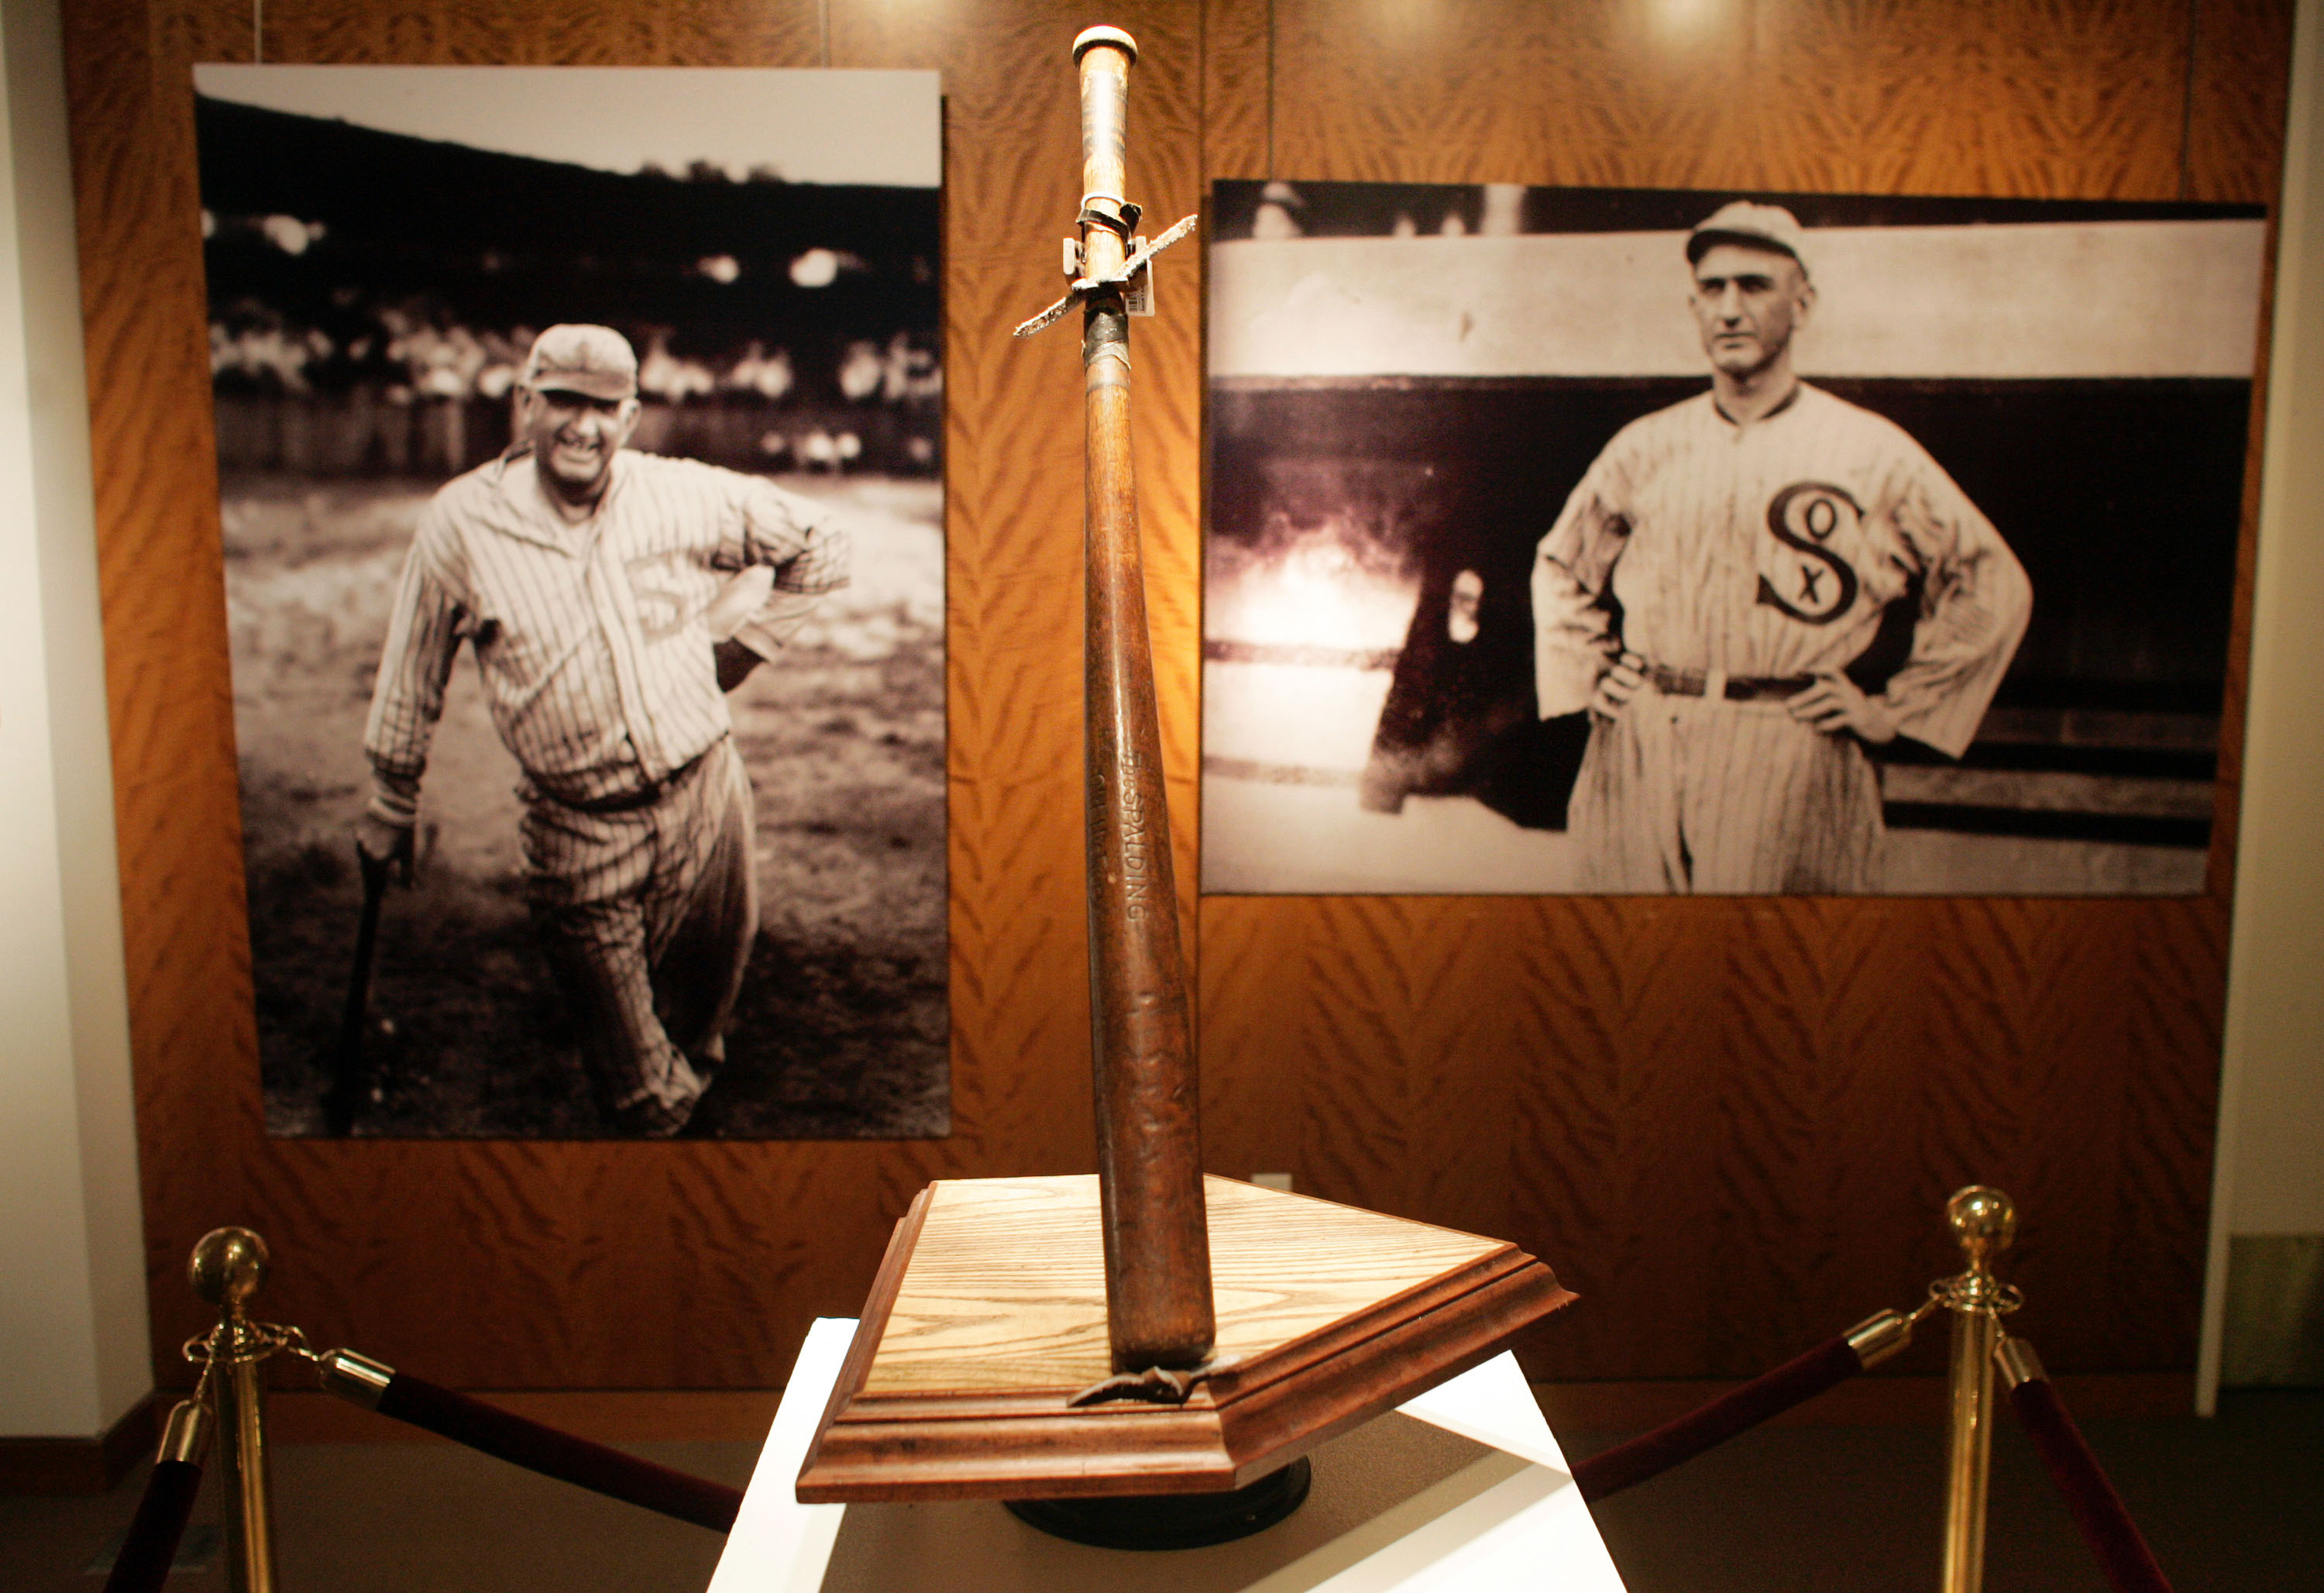 NEW YORK - DECEMBER 5:  'Shoeless' Joe Jackson's bat stands on display during an auction preview at Sotheby's December 5, 2005 in New York City. The bat, called 'Black Betsy,' will be auctioned December 10 and was last purchased at a 2001 auction for $577